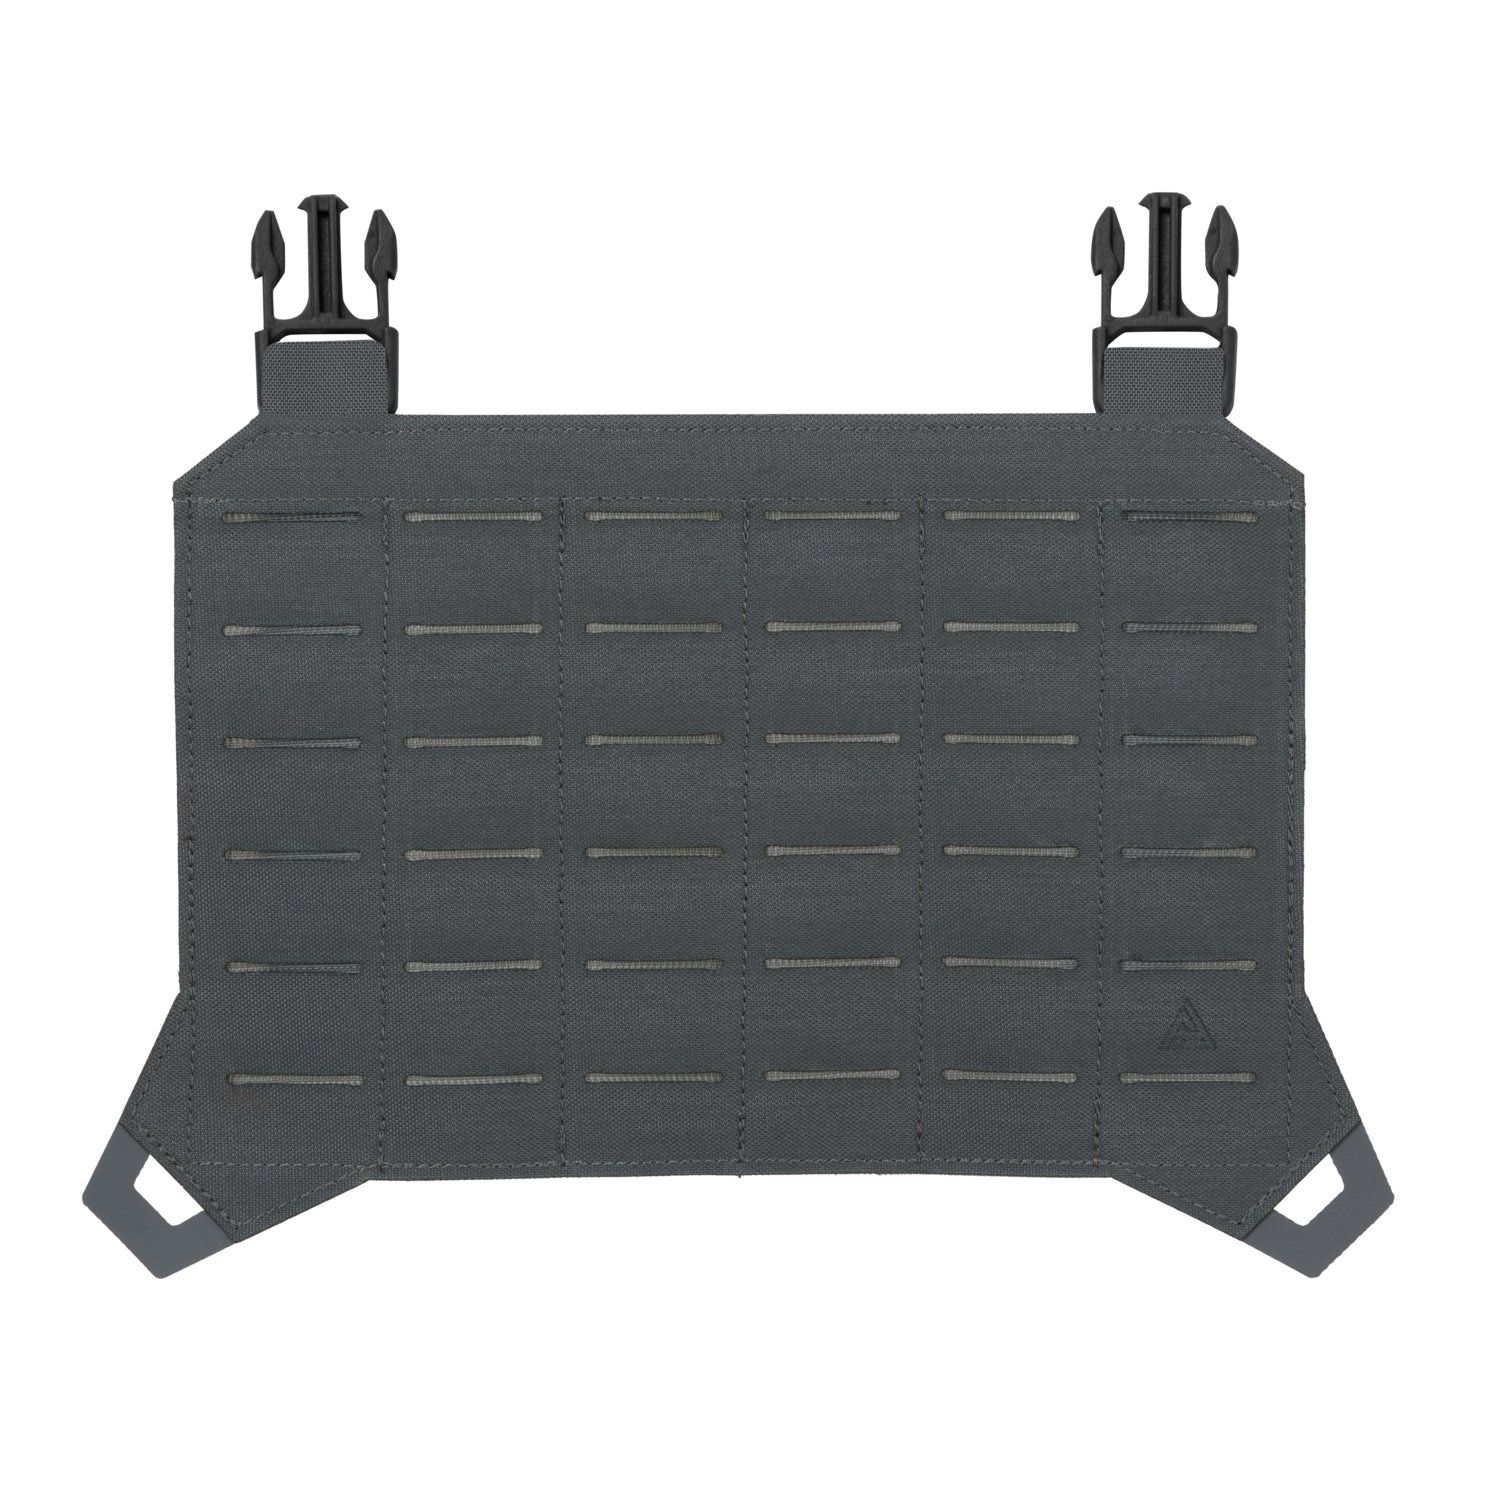 Klapa DIRECT ACTION Spitfire Molle Flap Shadow Grey (PC-MLFP-CD5-SGR)